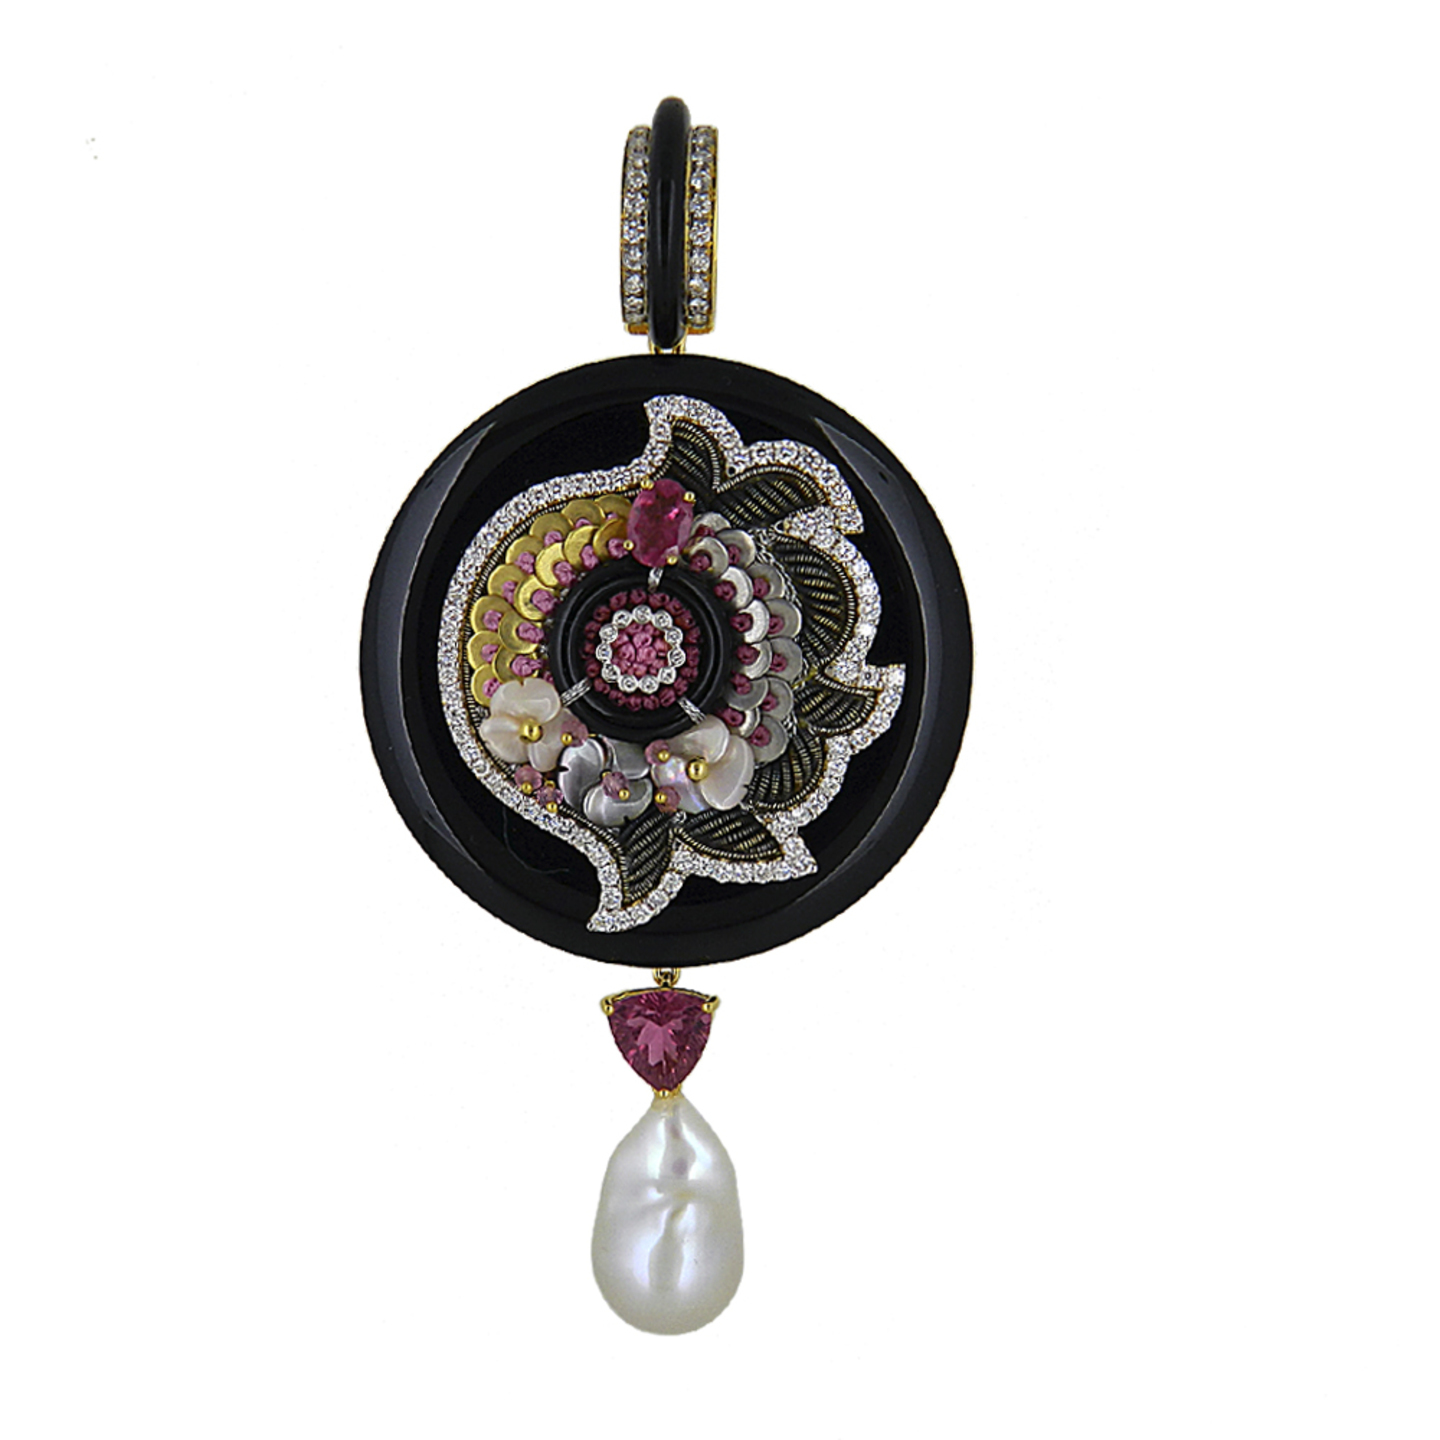 An opulent circular pendant set in pink and black combination crafted using precious gold sequins and wires embellished with gemstones and diamonds